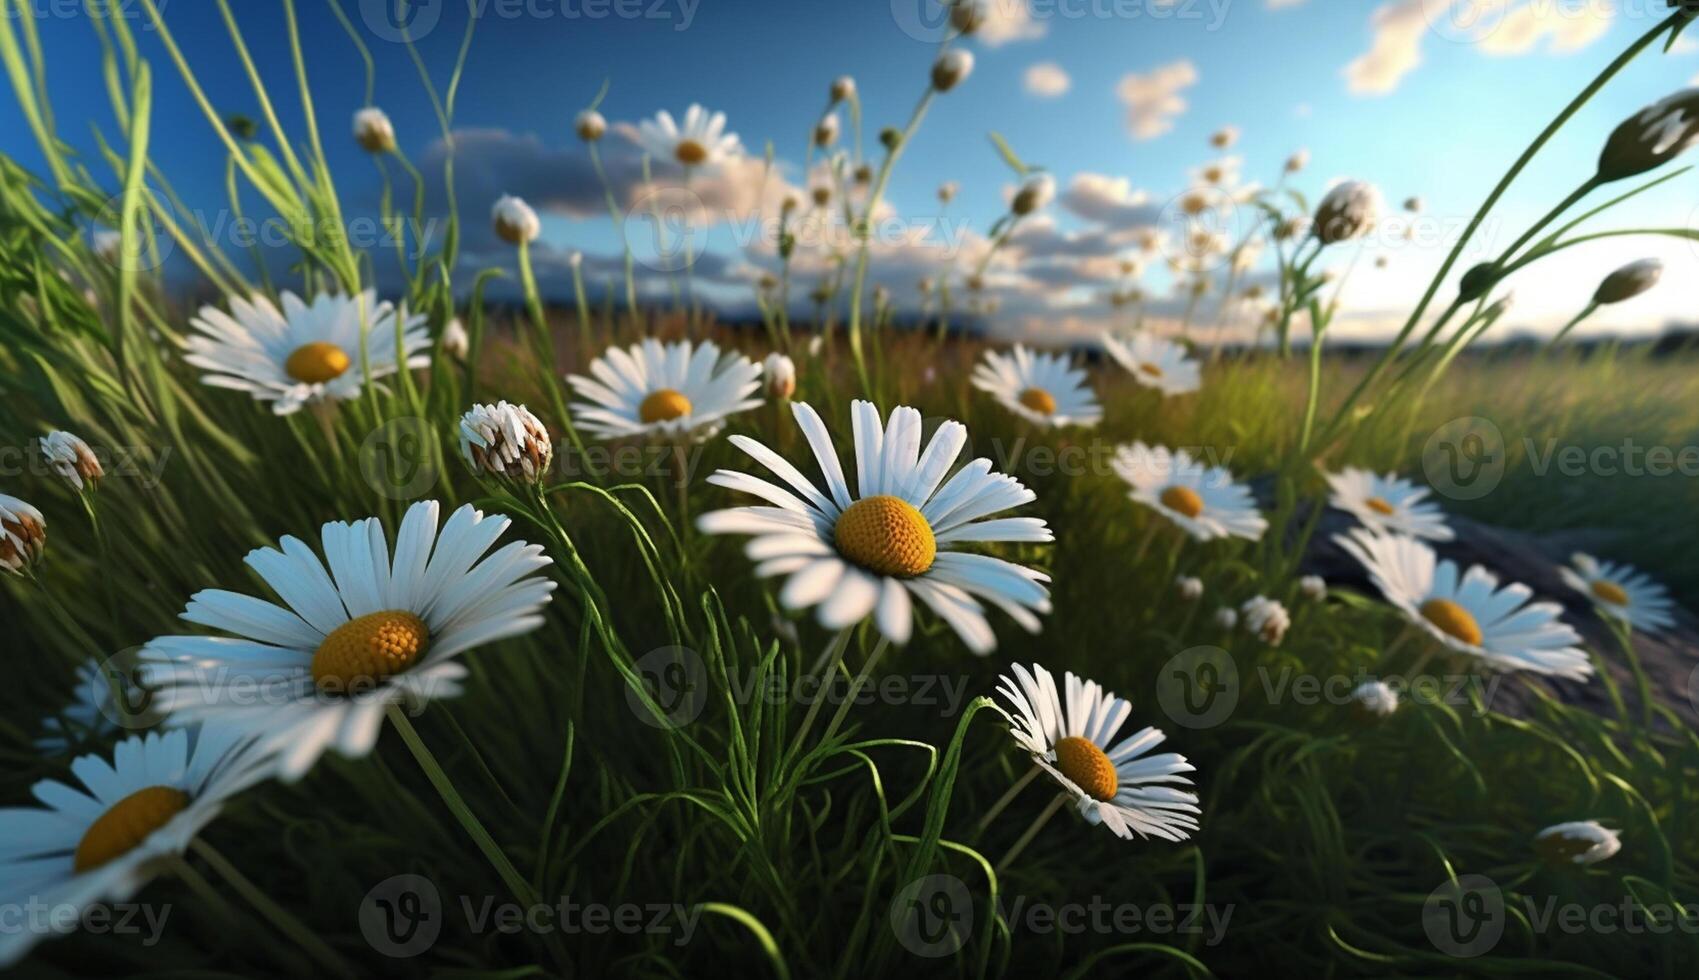 Wild Daisies In The Grass With A Blue Sky, photo